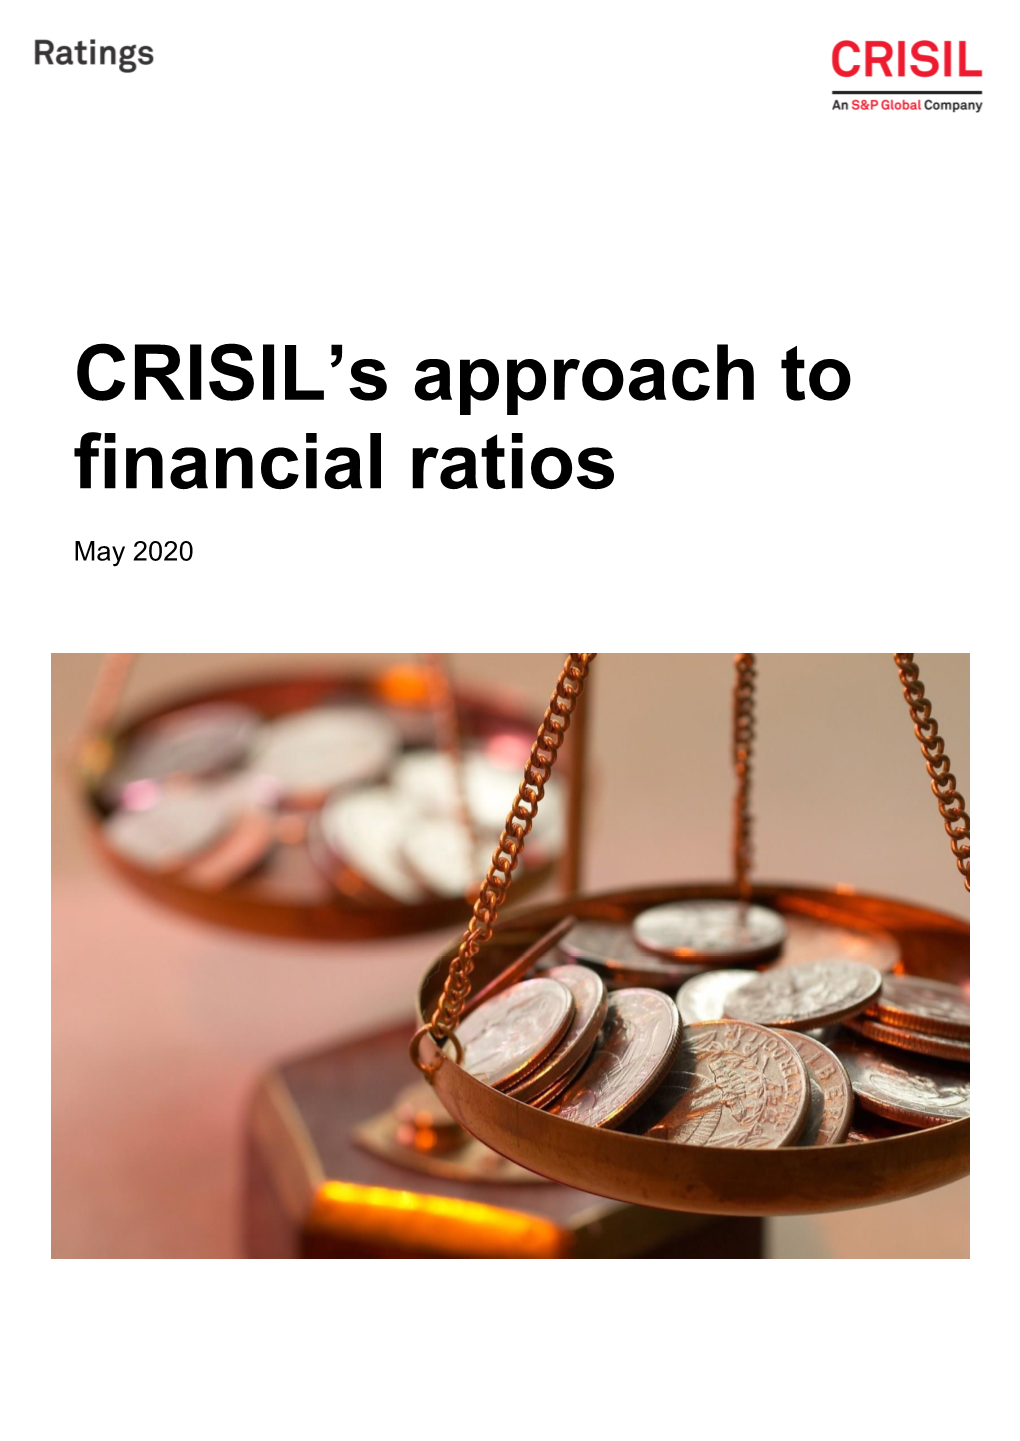 CRISIL's Approach to Financial Ratios